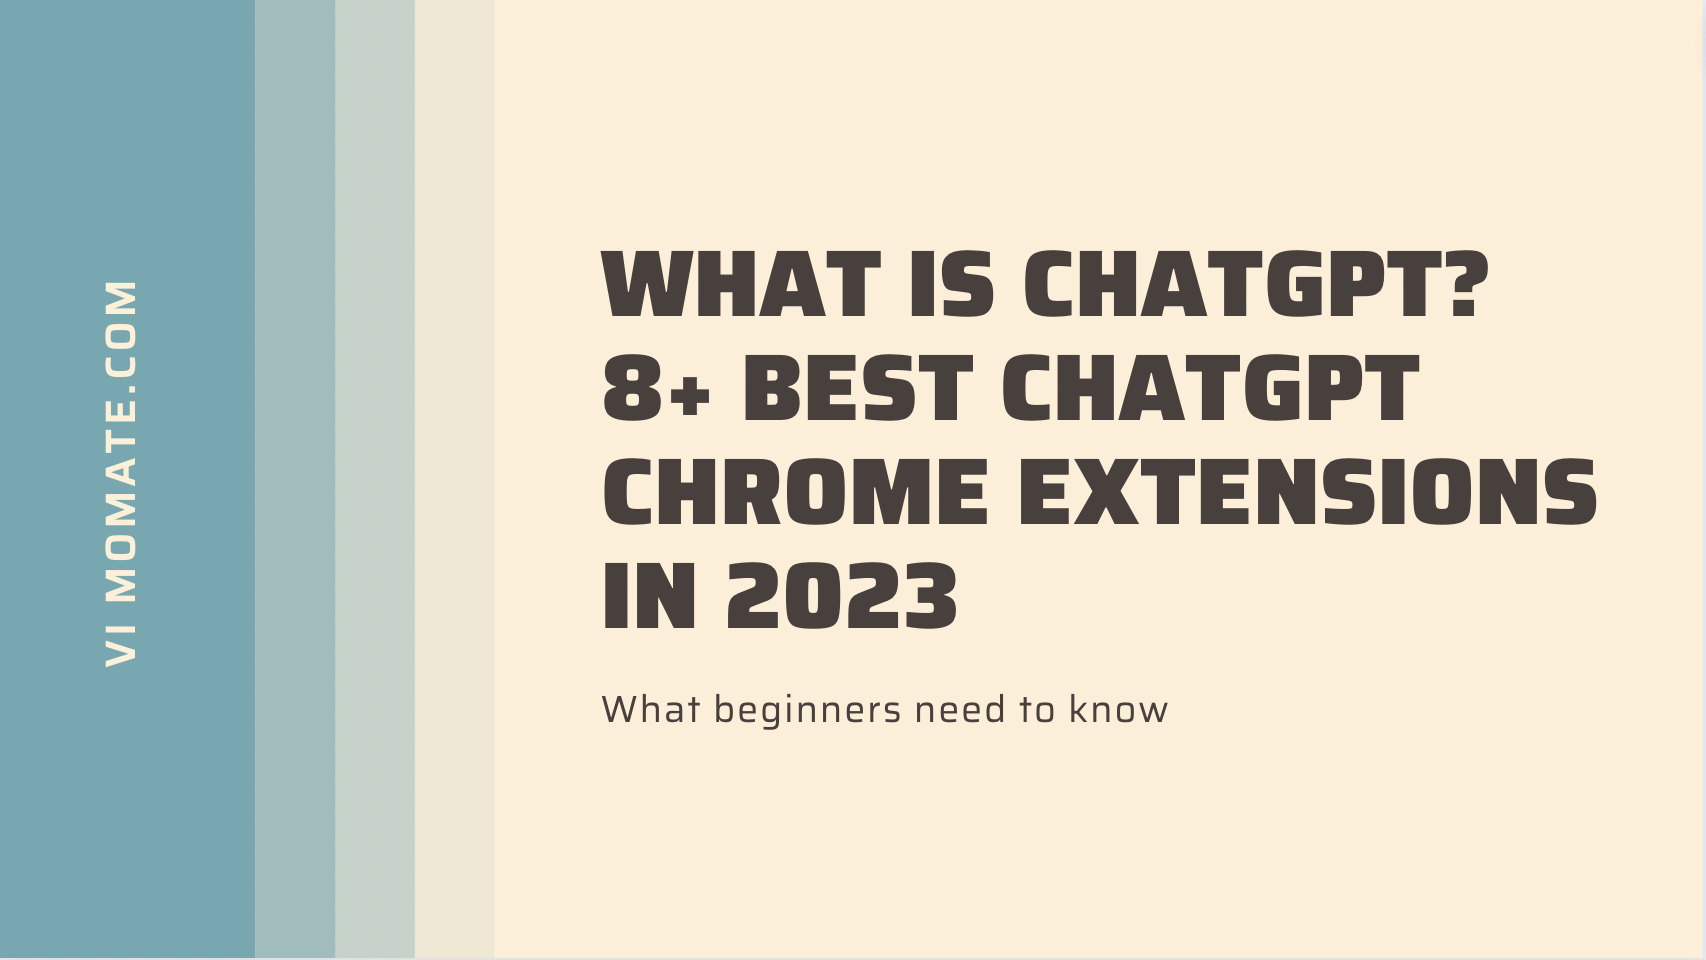 What is ChatGPT? | 8+ Best ChatGPT Chrome Extensions in 2023